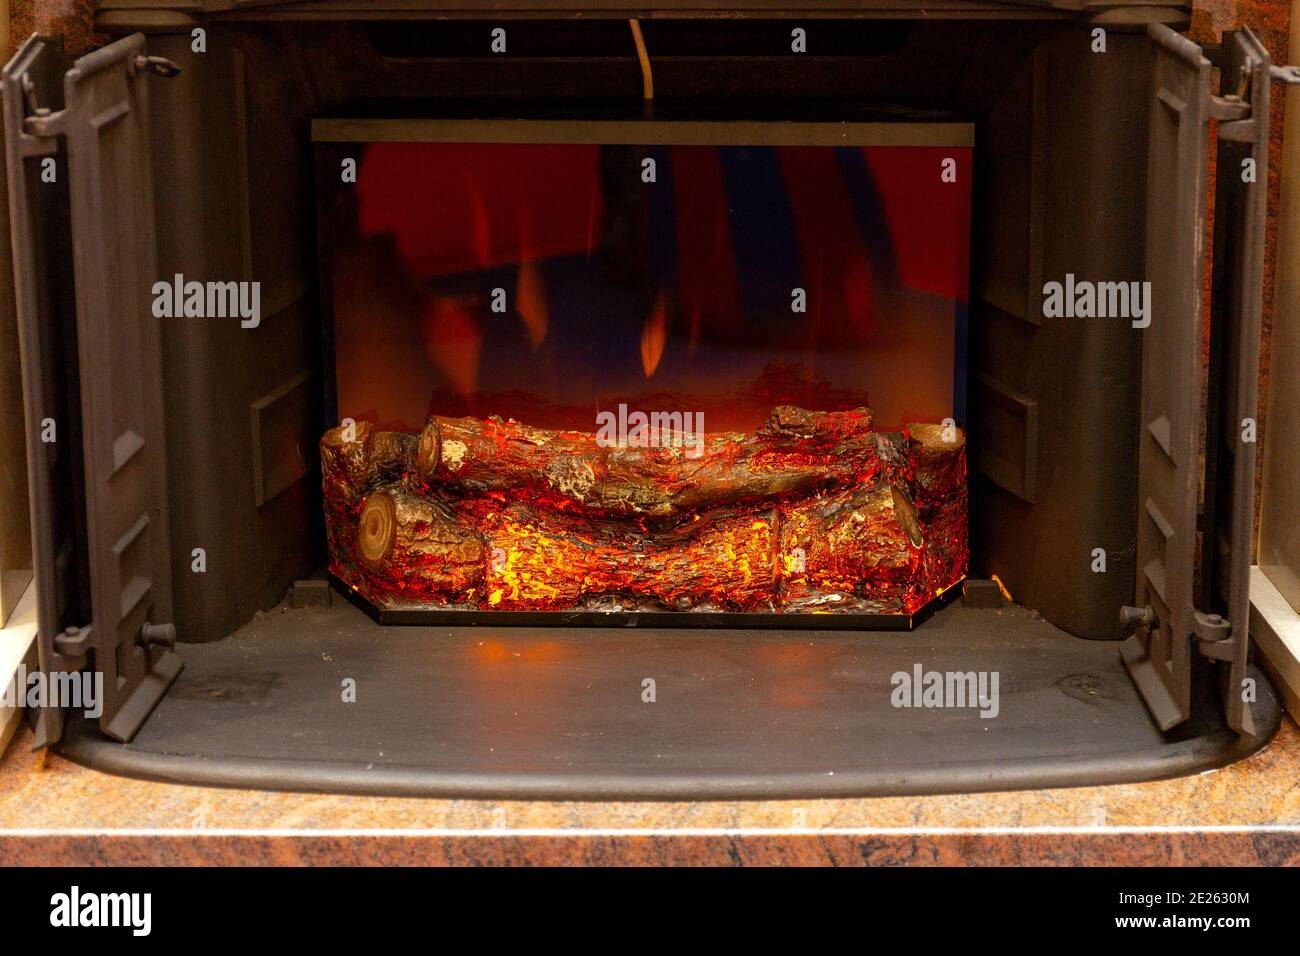 Flickering Effects Ceramic Wood Logs in Electronic Firebox Stock Photo